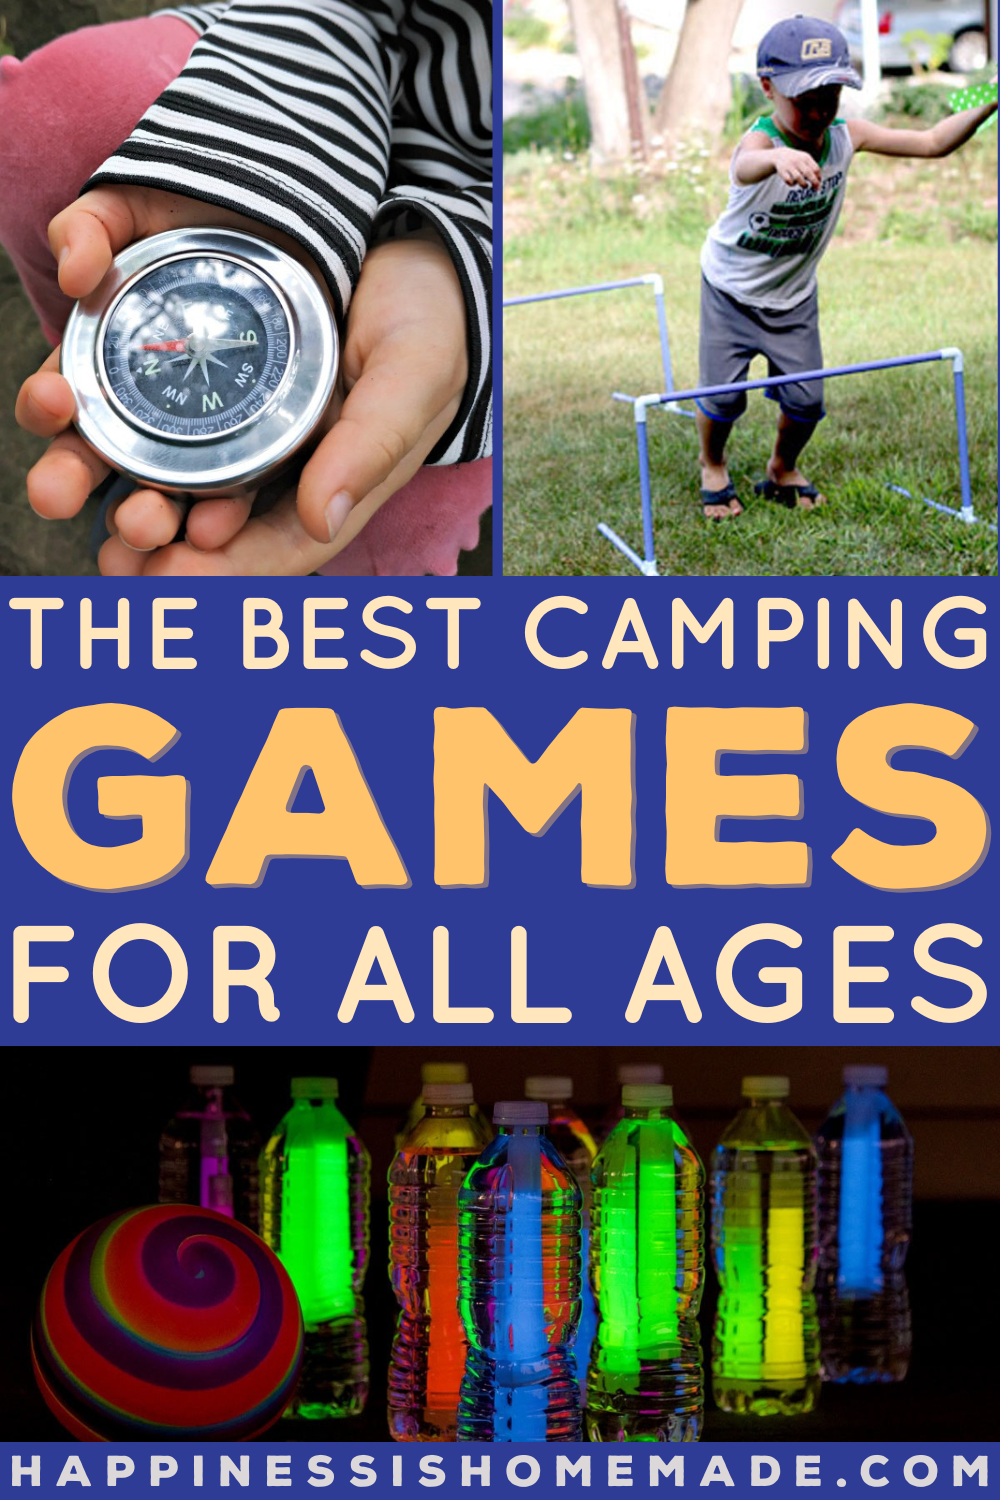 The best camping games for all ages